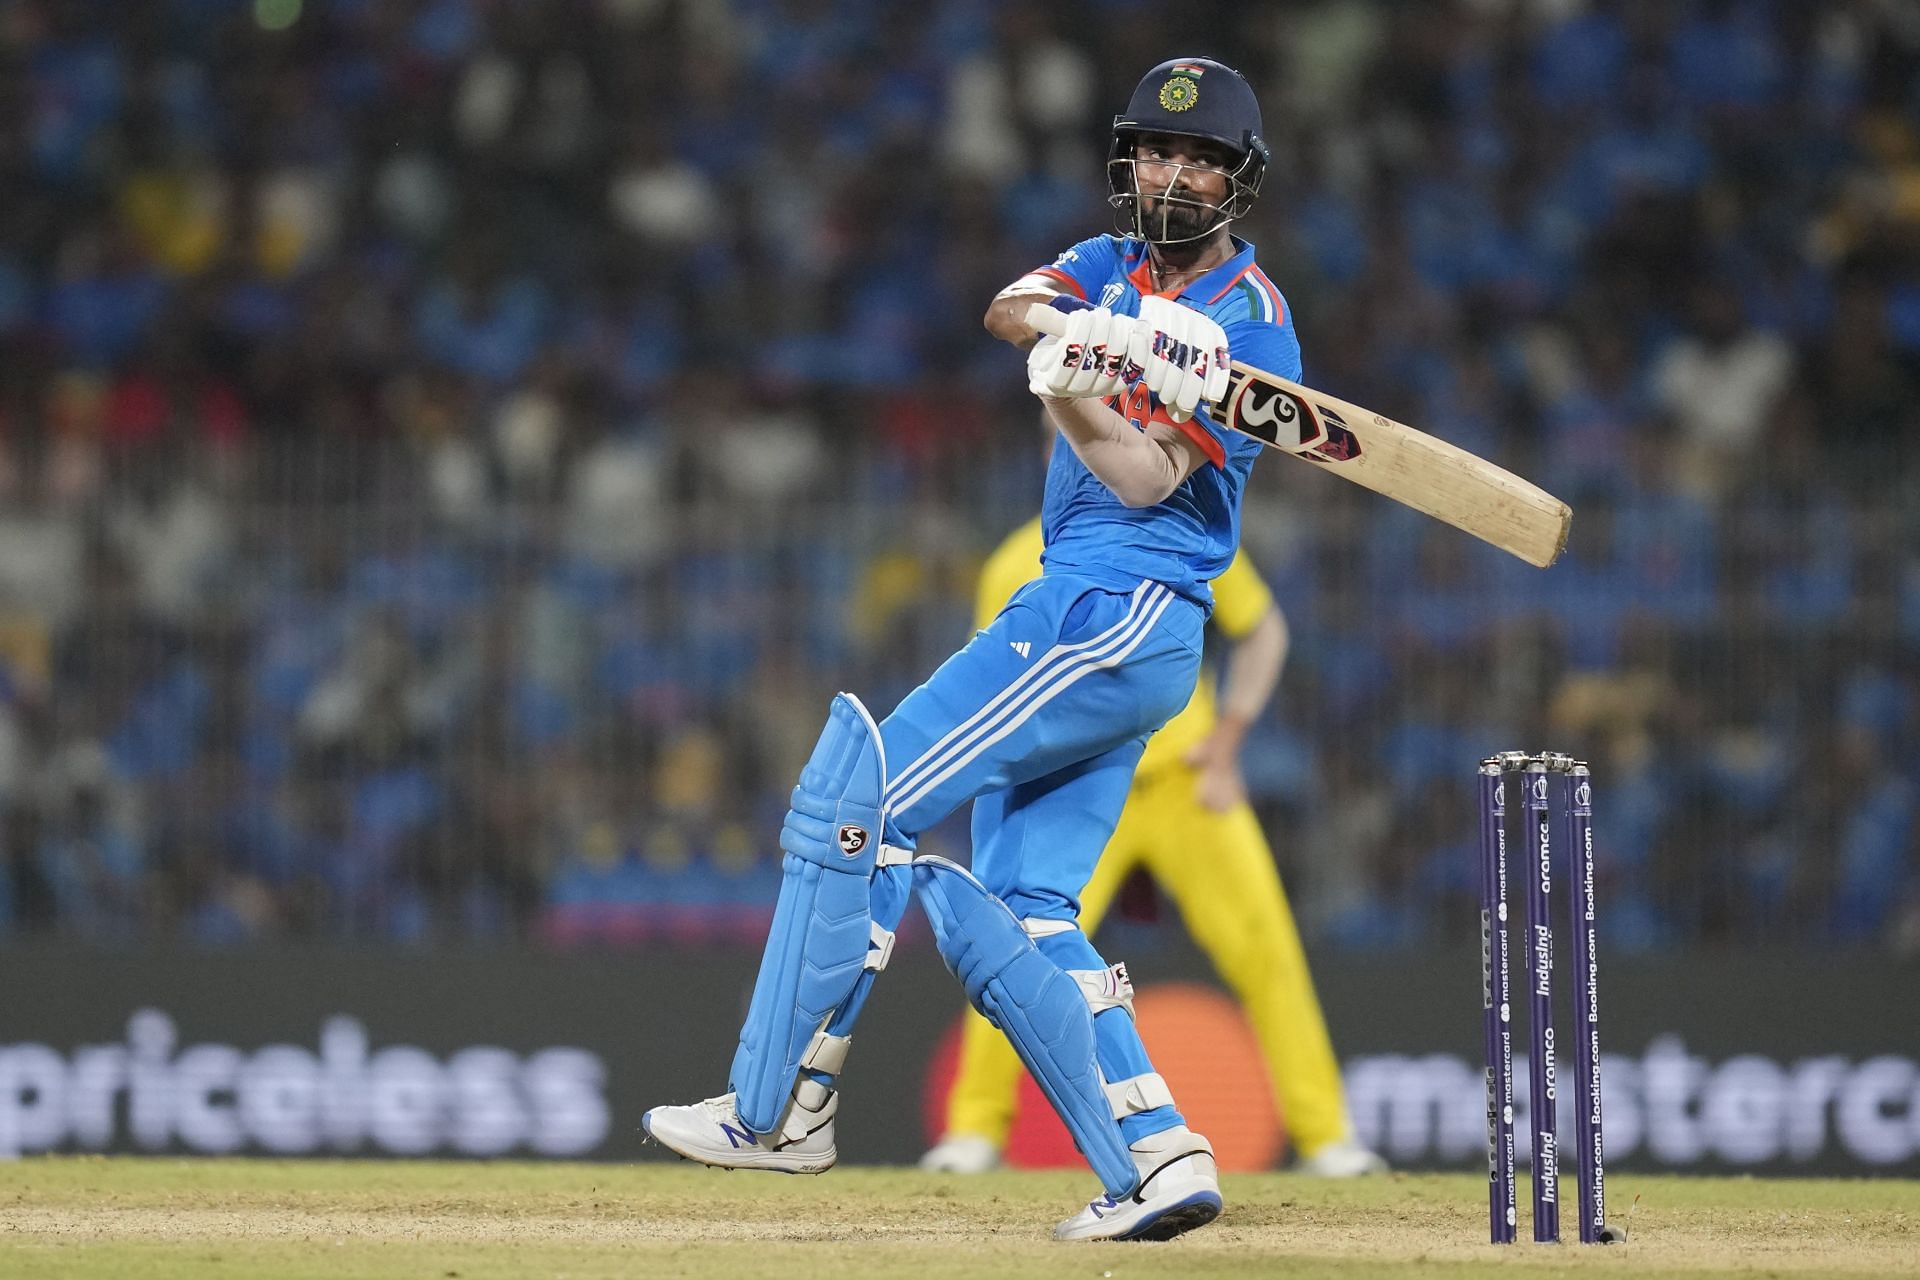 KL Rahul struck eight fours and two sixes during his innings. [P/C: AP]